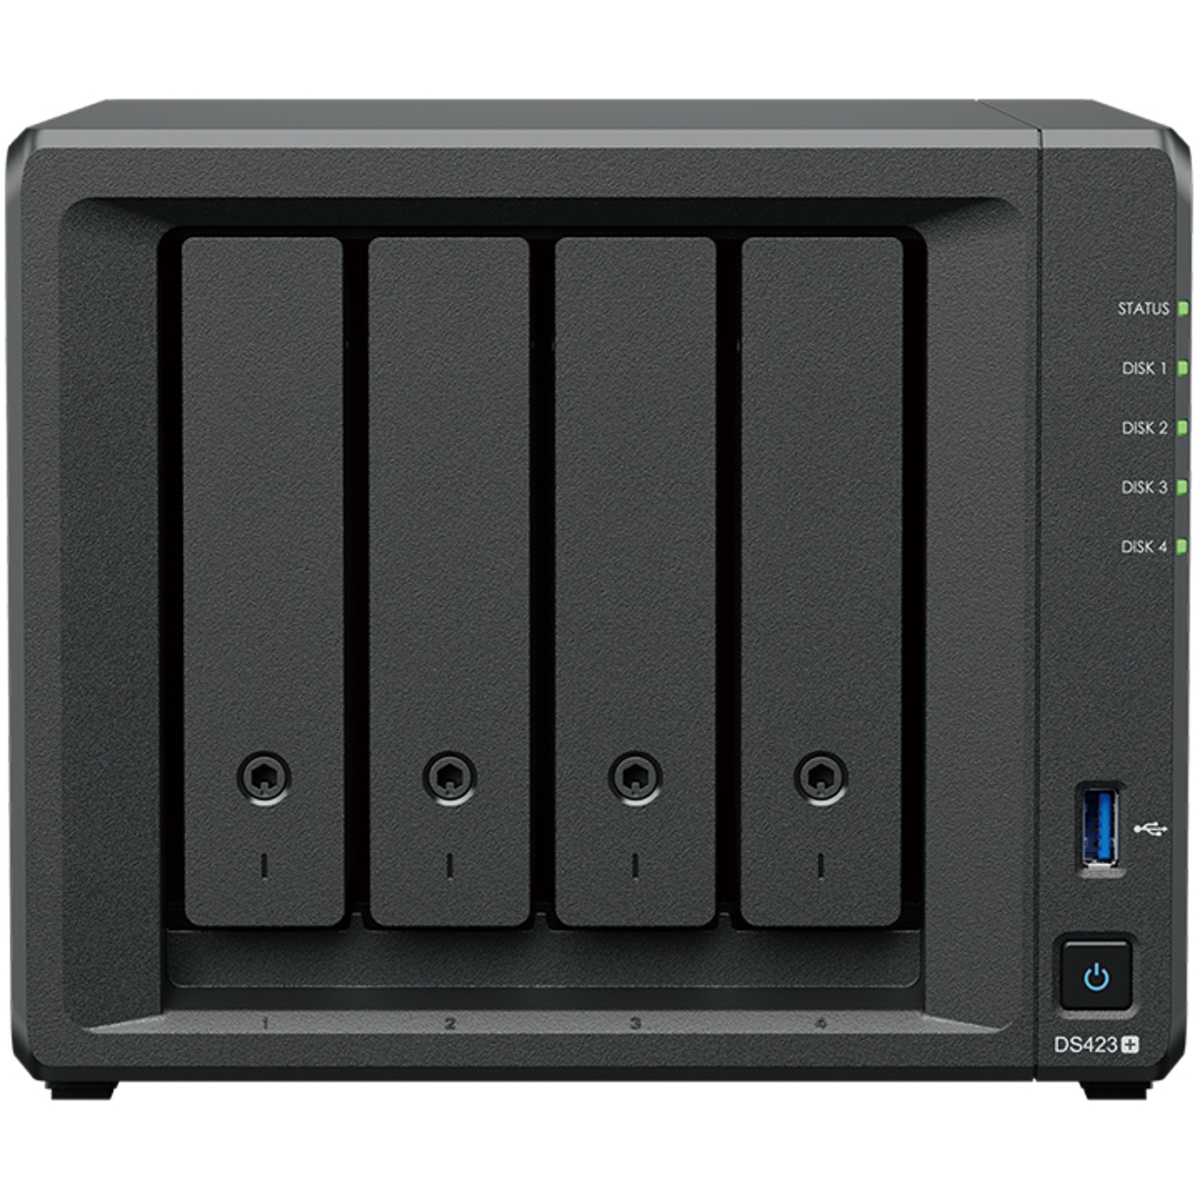 Synology DiskStation DS423+ 72tb 4-Bay Desktop Multimedia / Power User / Business NAS - Network Attached Storage Device 4x18tb Seagate IronWolf Pro ST18000NT001 3.5 7200rpm SATA 6Gb/s HDD NAS Class Drives Installed - Burn-In Tested - FREE RAM UPGRADE DiskStation DS423+